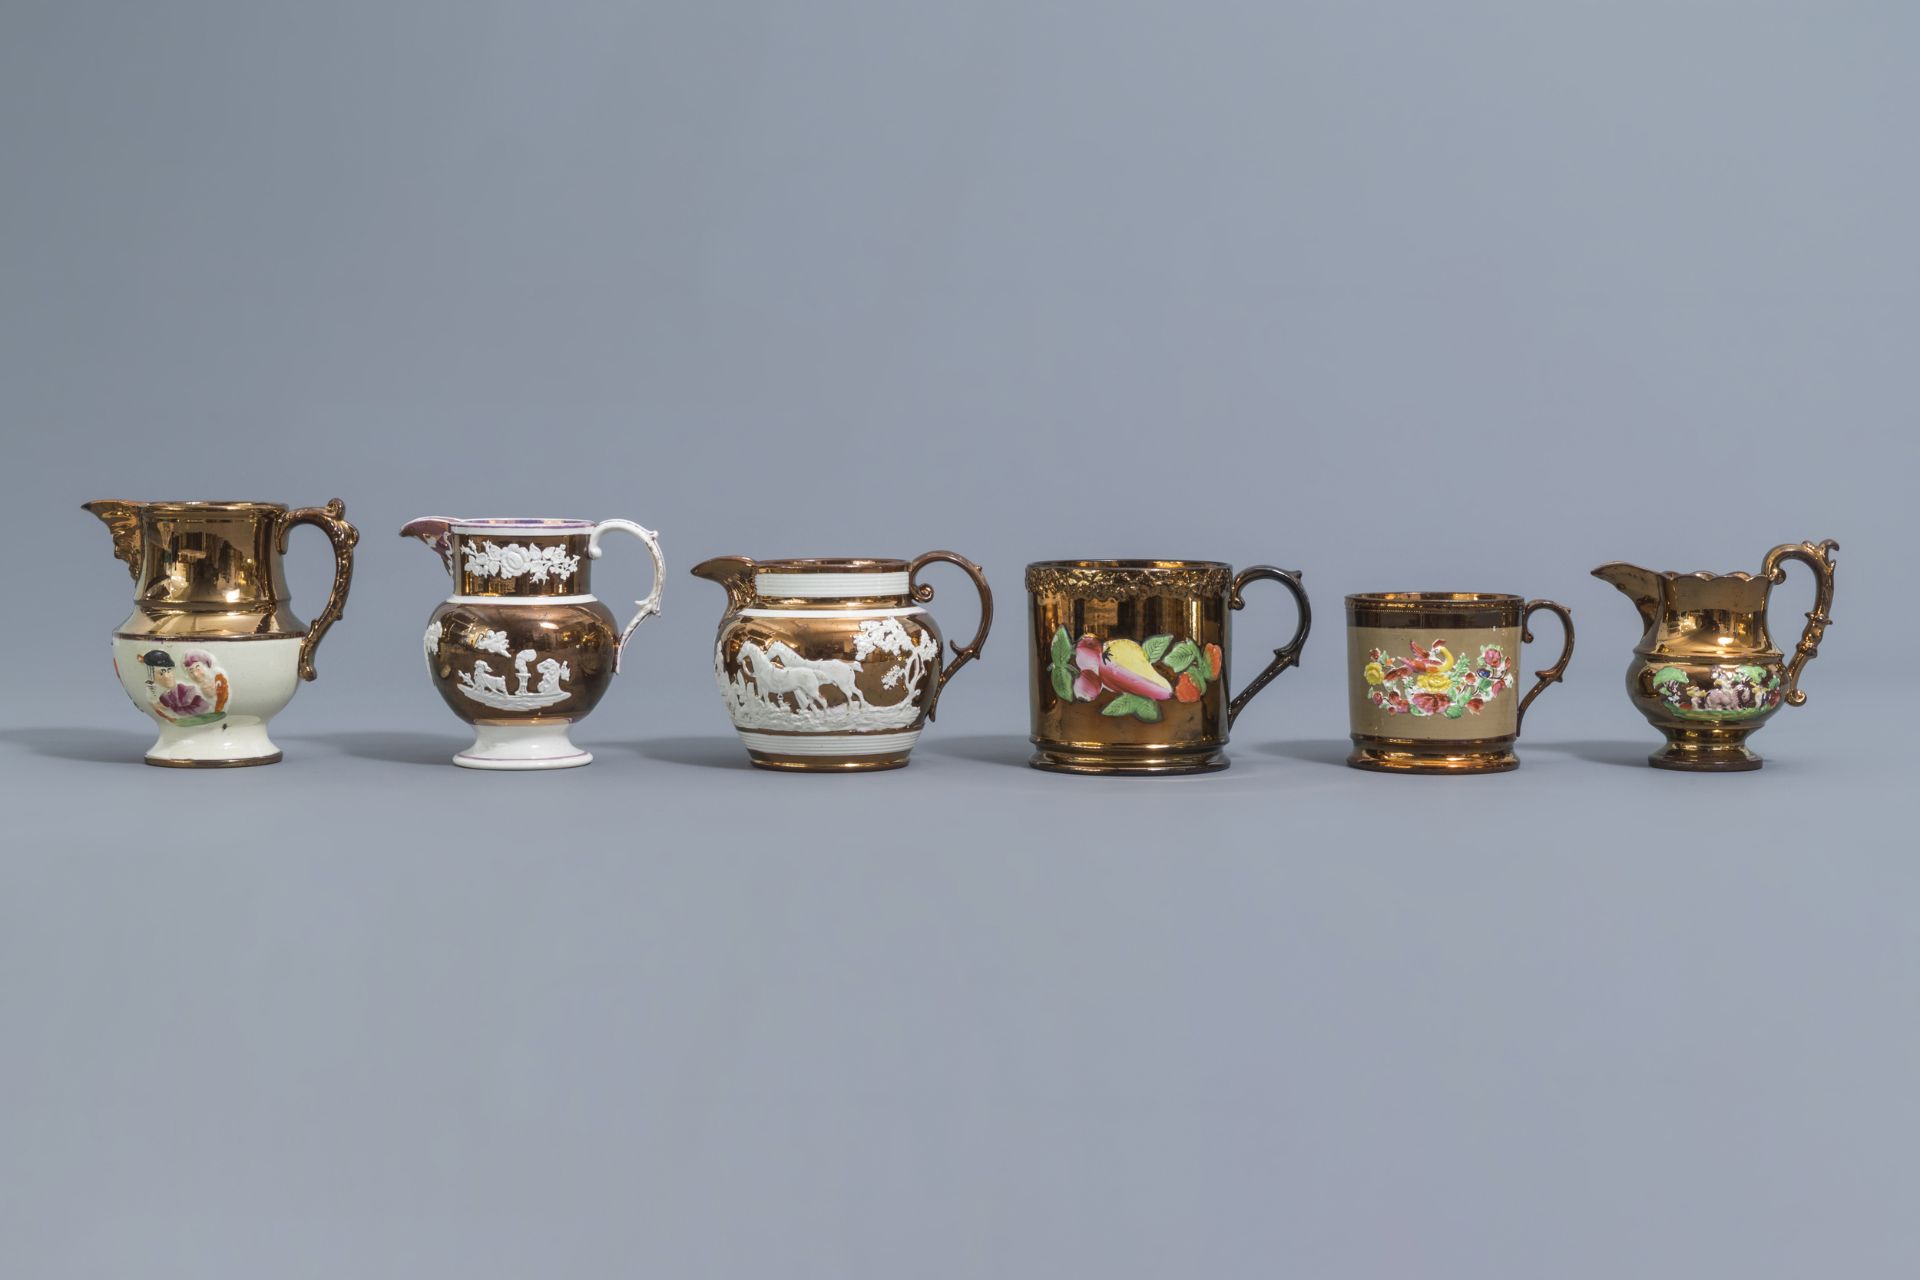 A varied collection of English lustreware items with relief design, 19th C. - Image 43 of 50